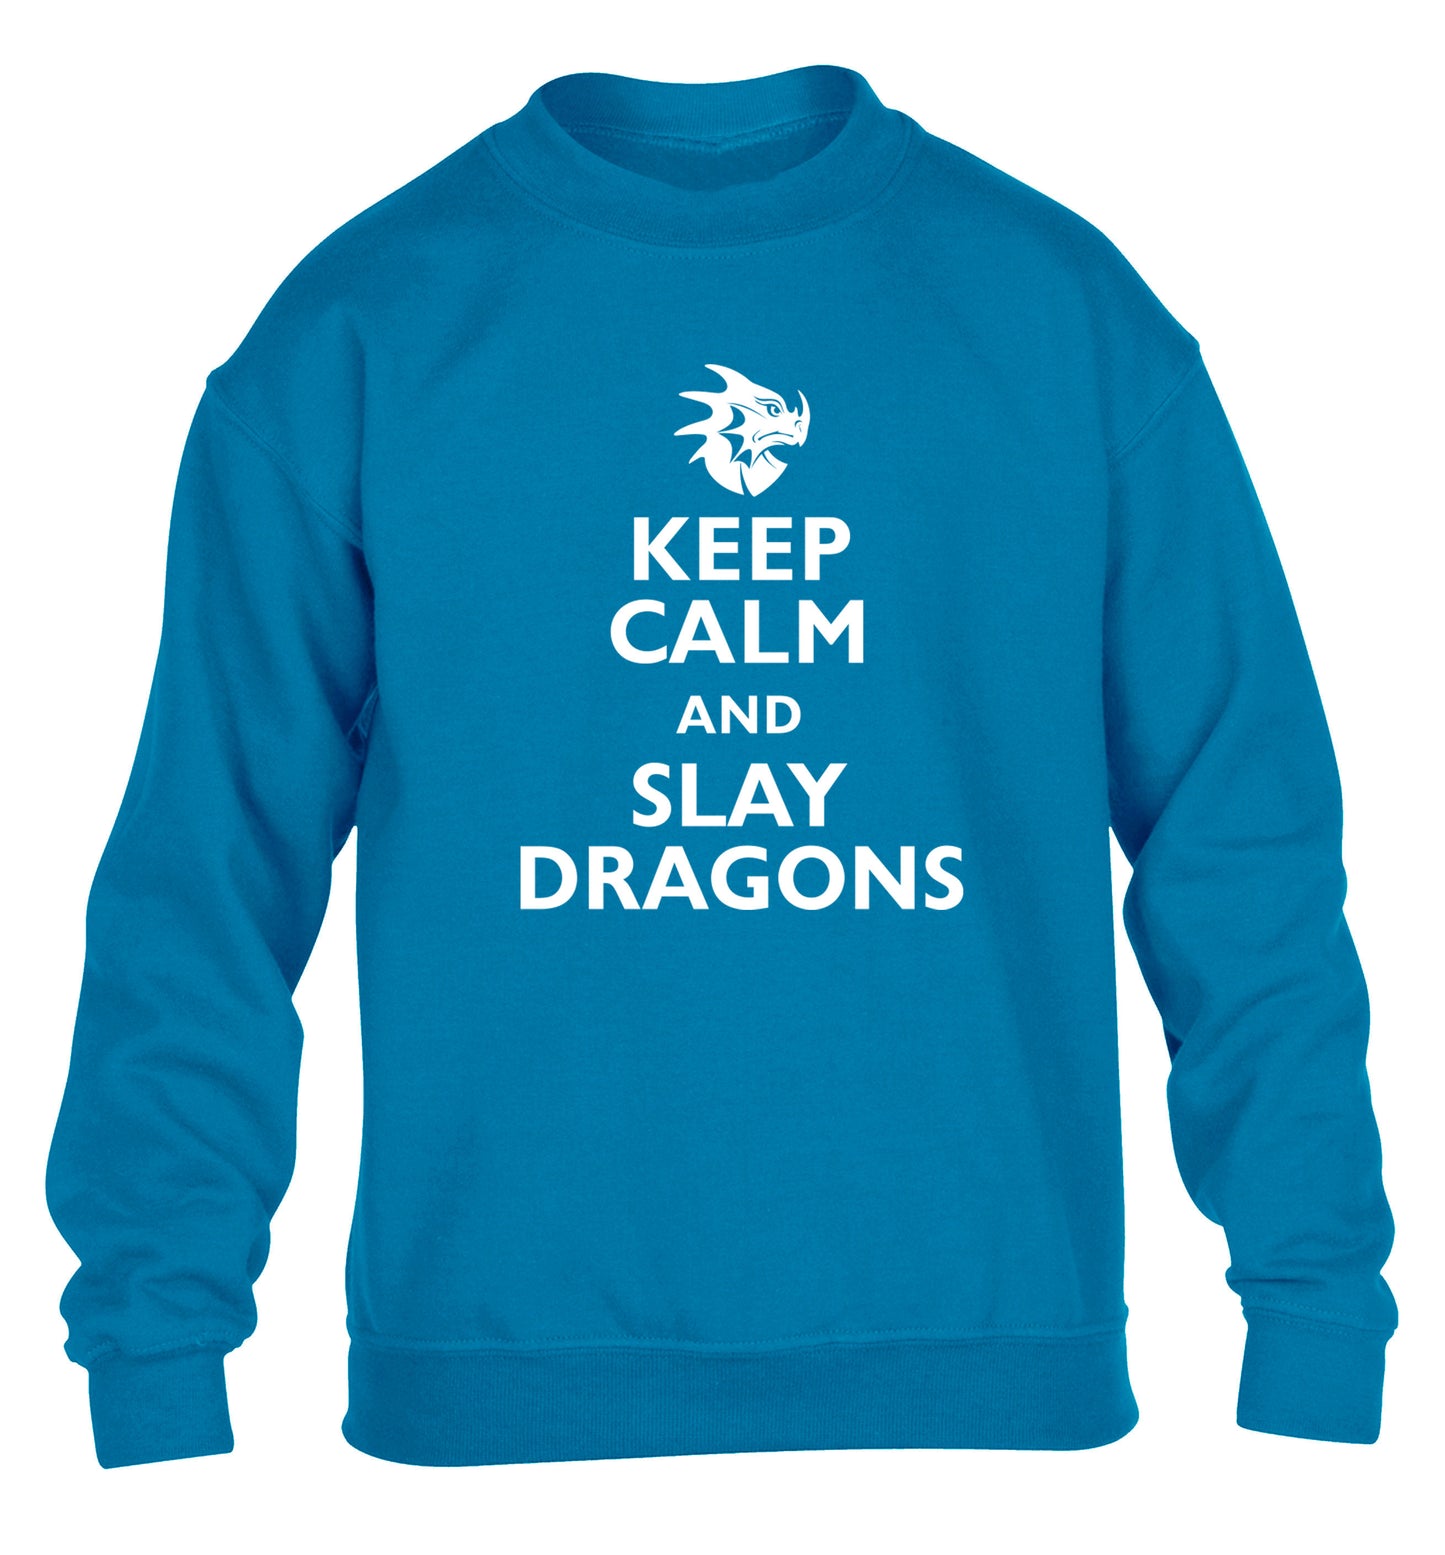 Keep calm and slay dragons children's blue sweater 12-14 Years